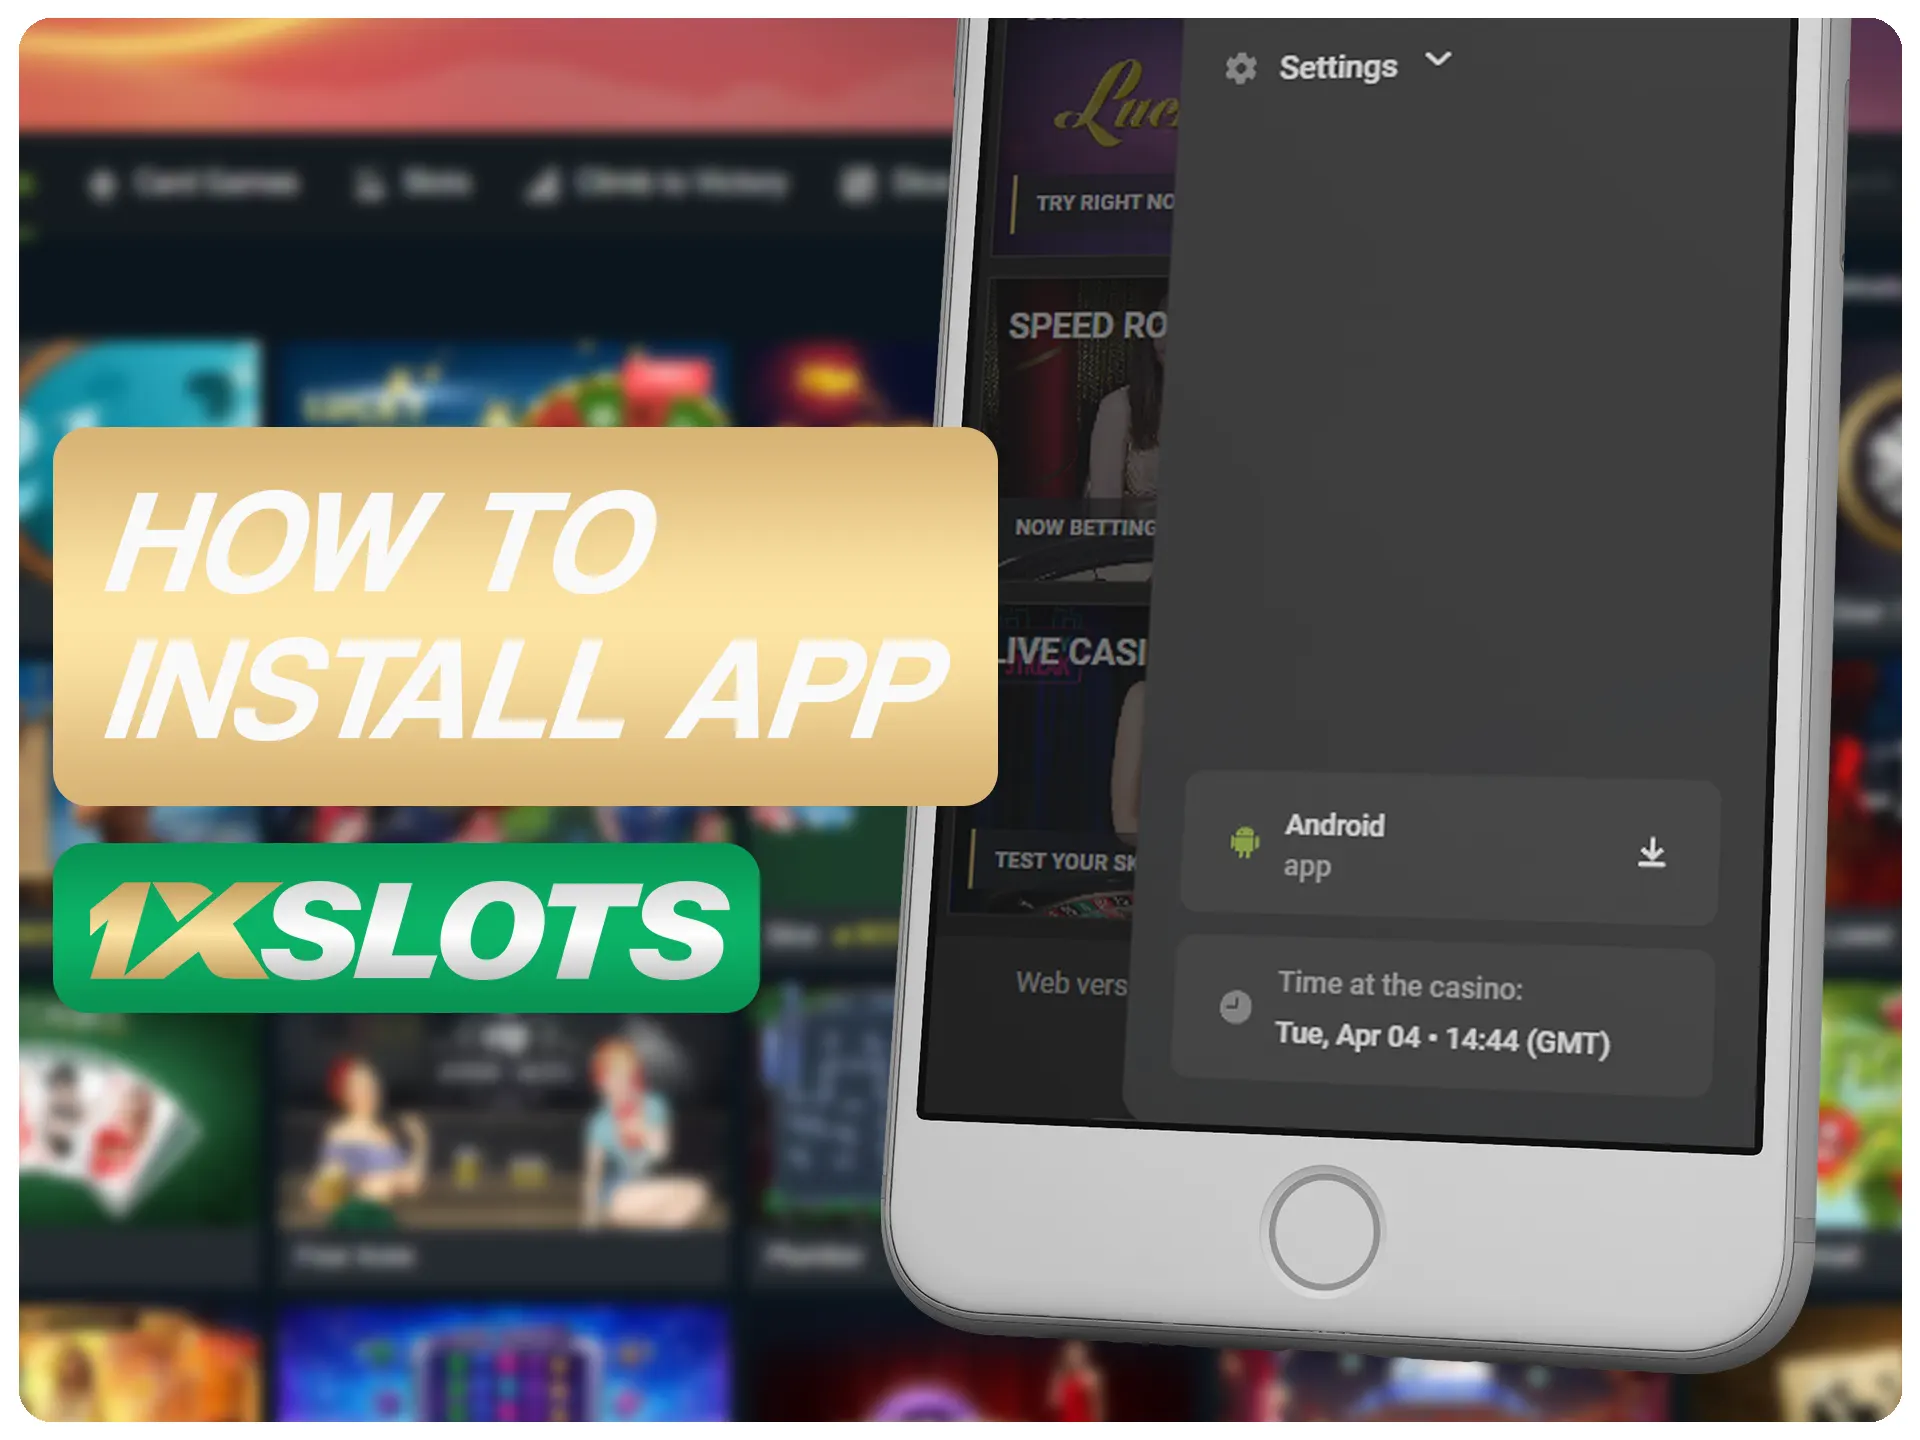 Download and install 1xSlots app.